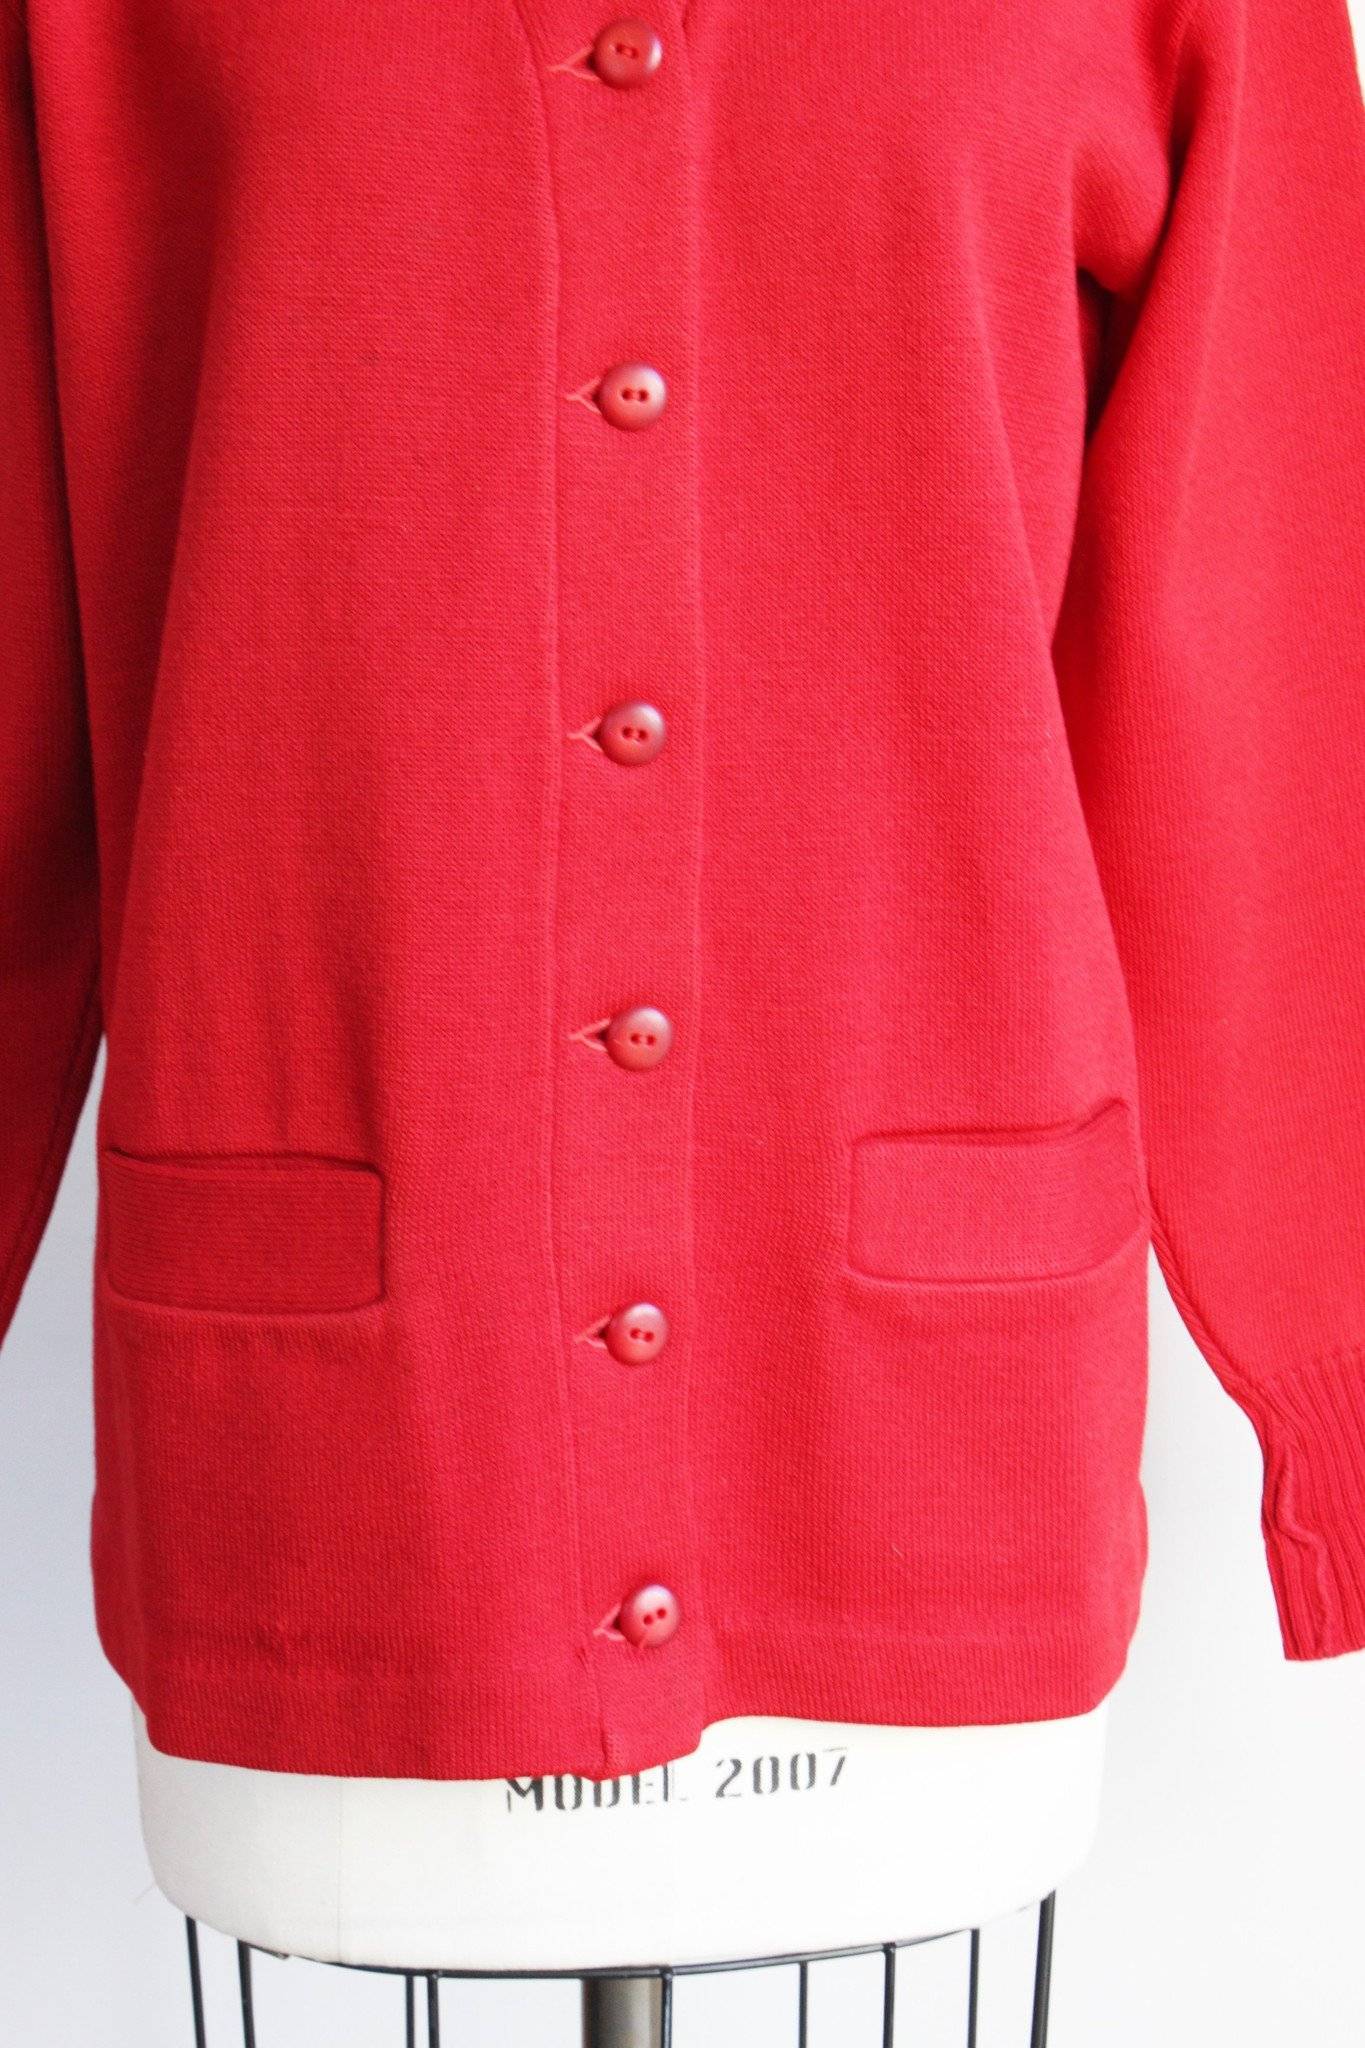 Vintage 1950s Red Criterion Class Sweater-Toadstool Farm Vintage-100 Percent,100% Virgin Wool,1950s Red Sweater,Class Sweater,Collegiate Cardigan,Criterior Class Sweater,Vintage,Vintage Clothing